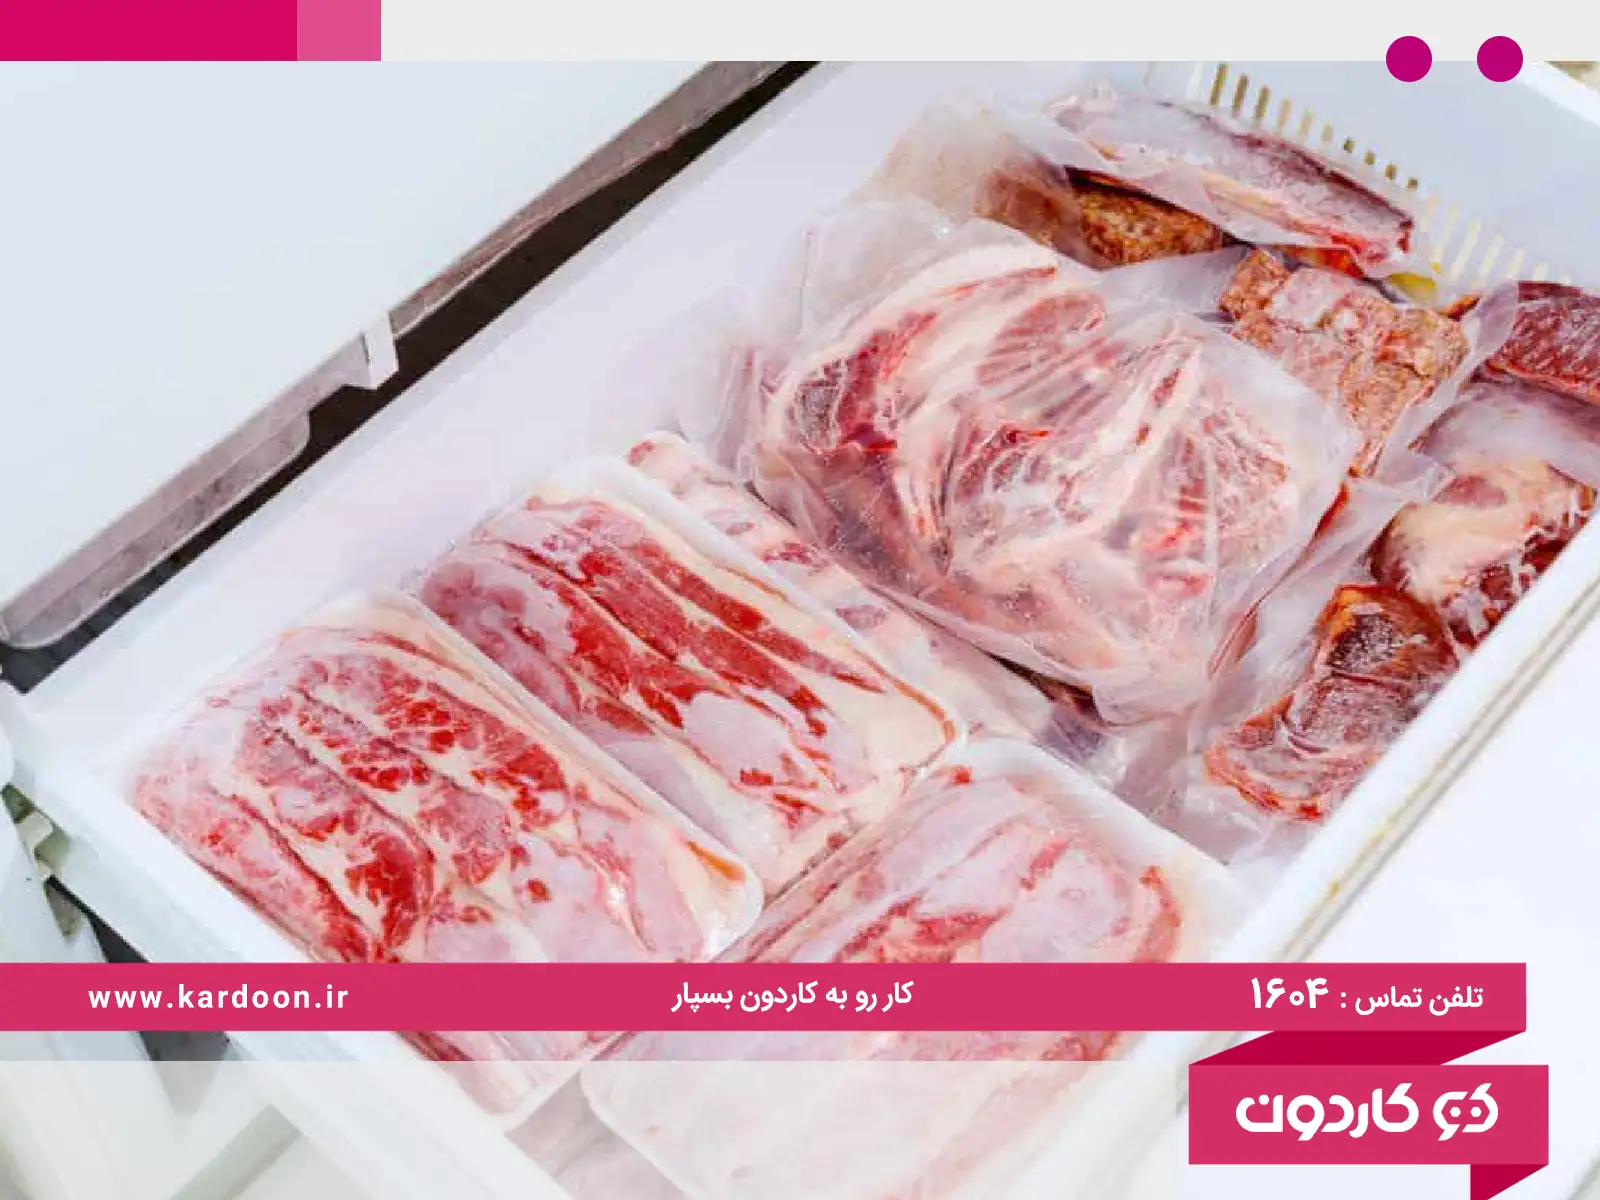 Symptoms of meat deterioration in the refrigerator